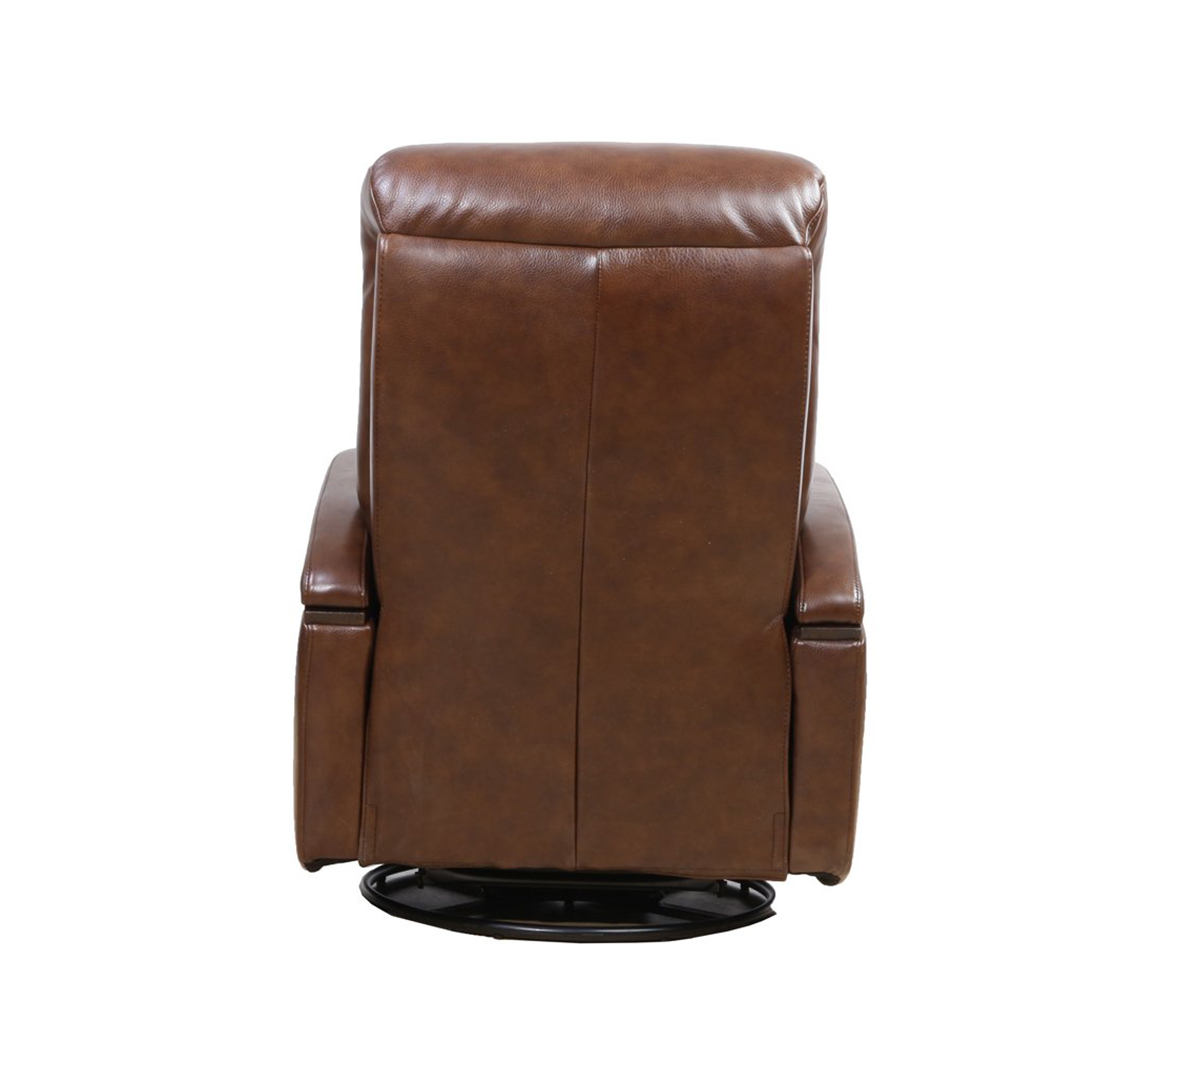 Barcalounger Jonas Swivel Glider Recliner Chair - Wenlock Double Chocolate/Leather Match